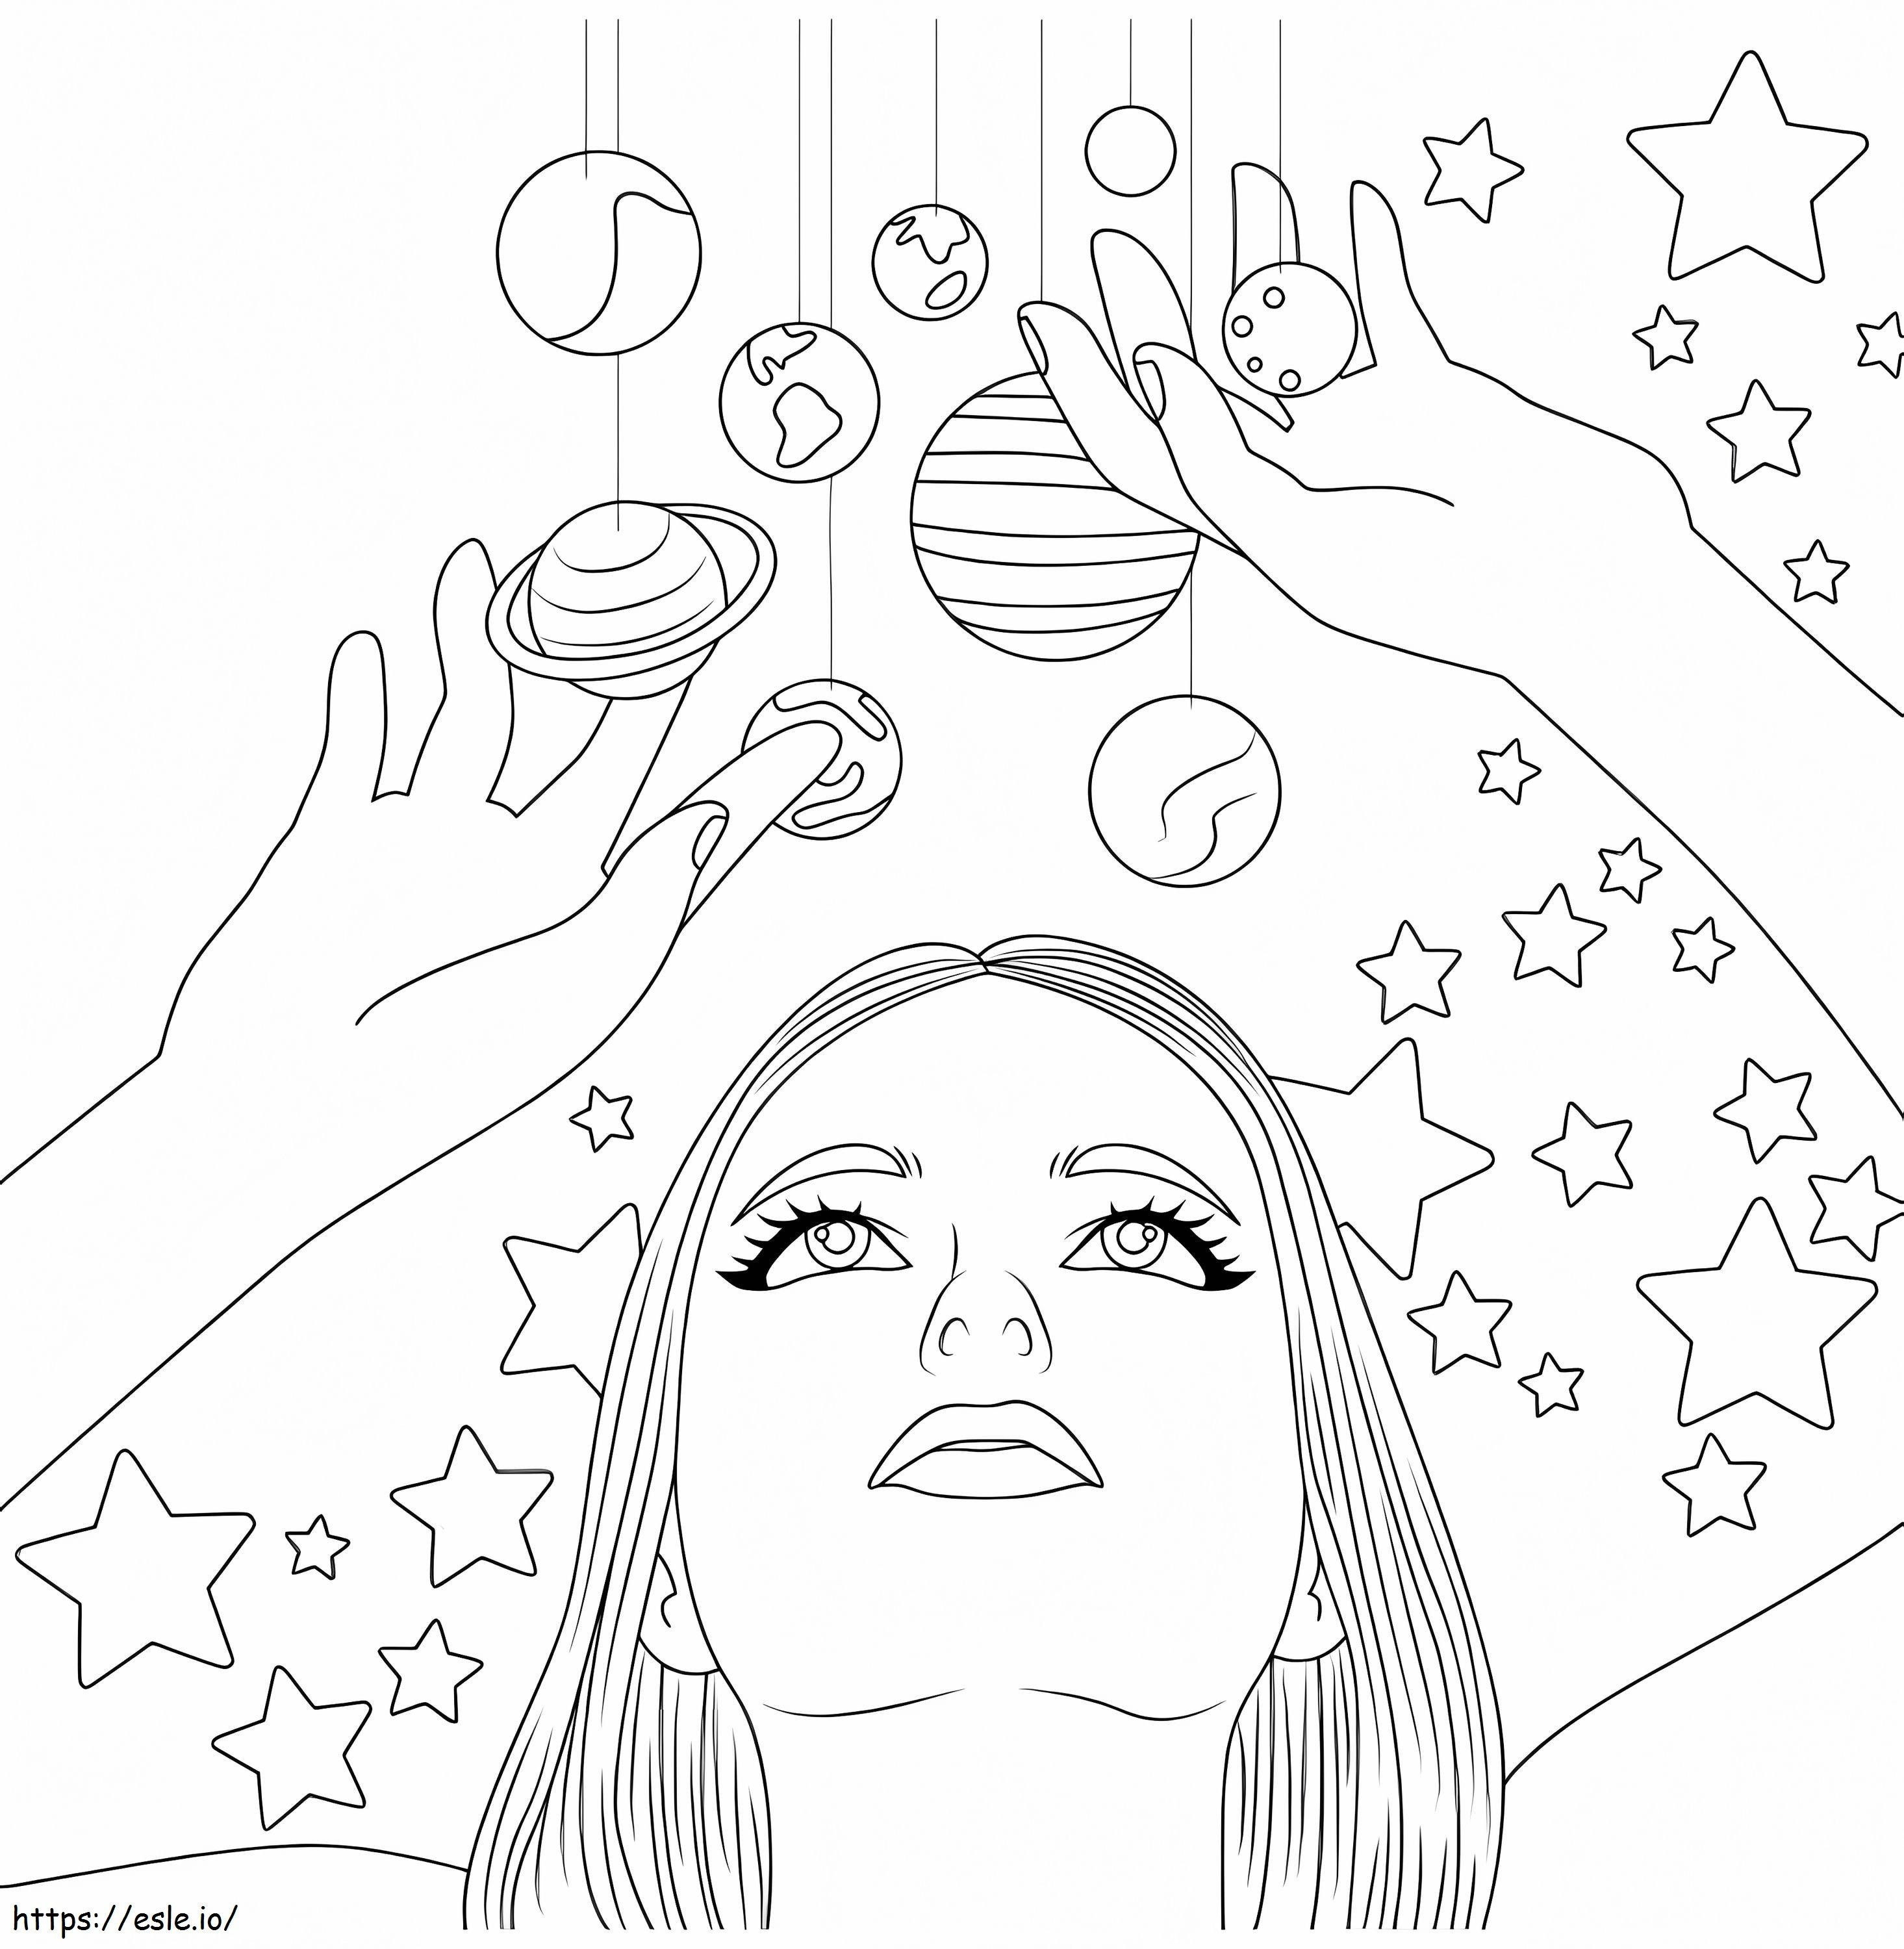 Cosmos Aesthetic coloring page